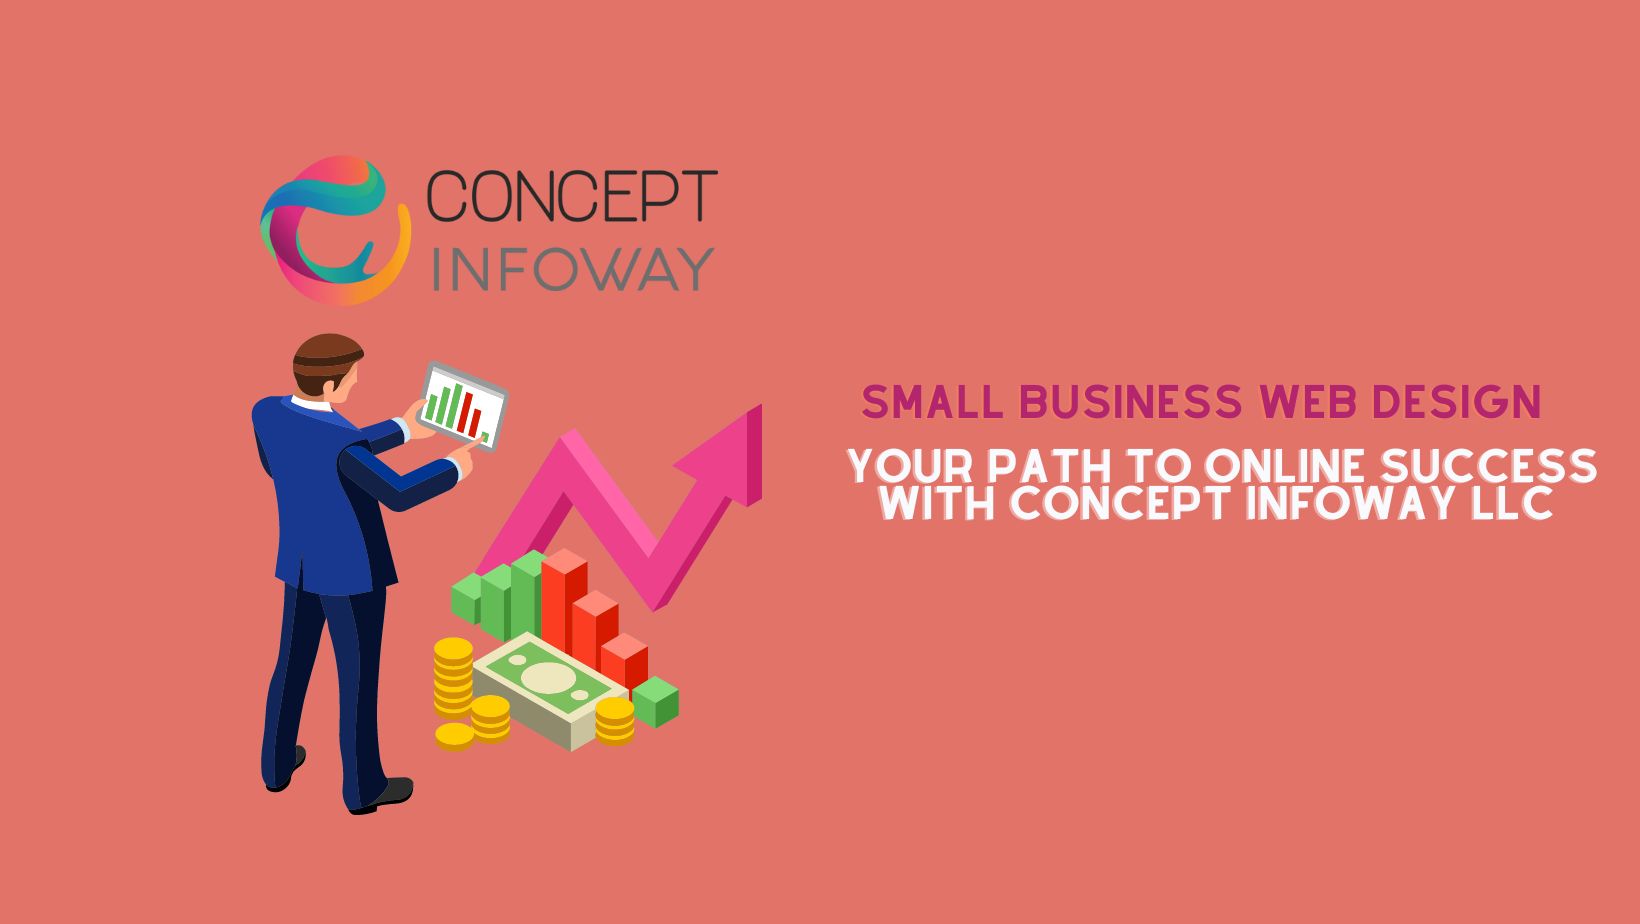 Small Business Web Design: Your Path to Online Success